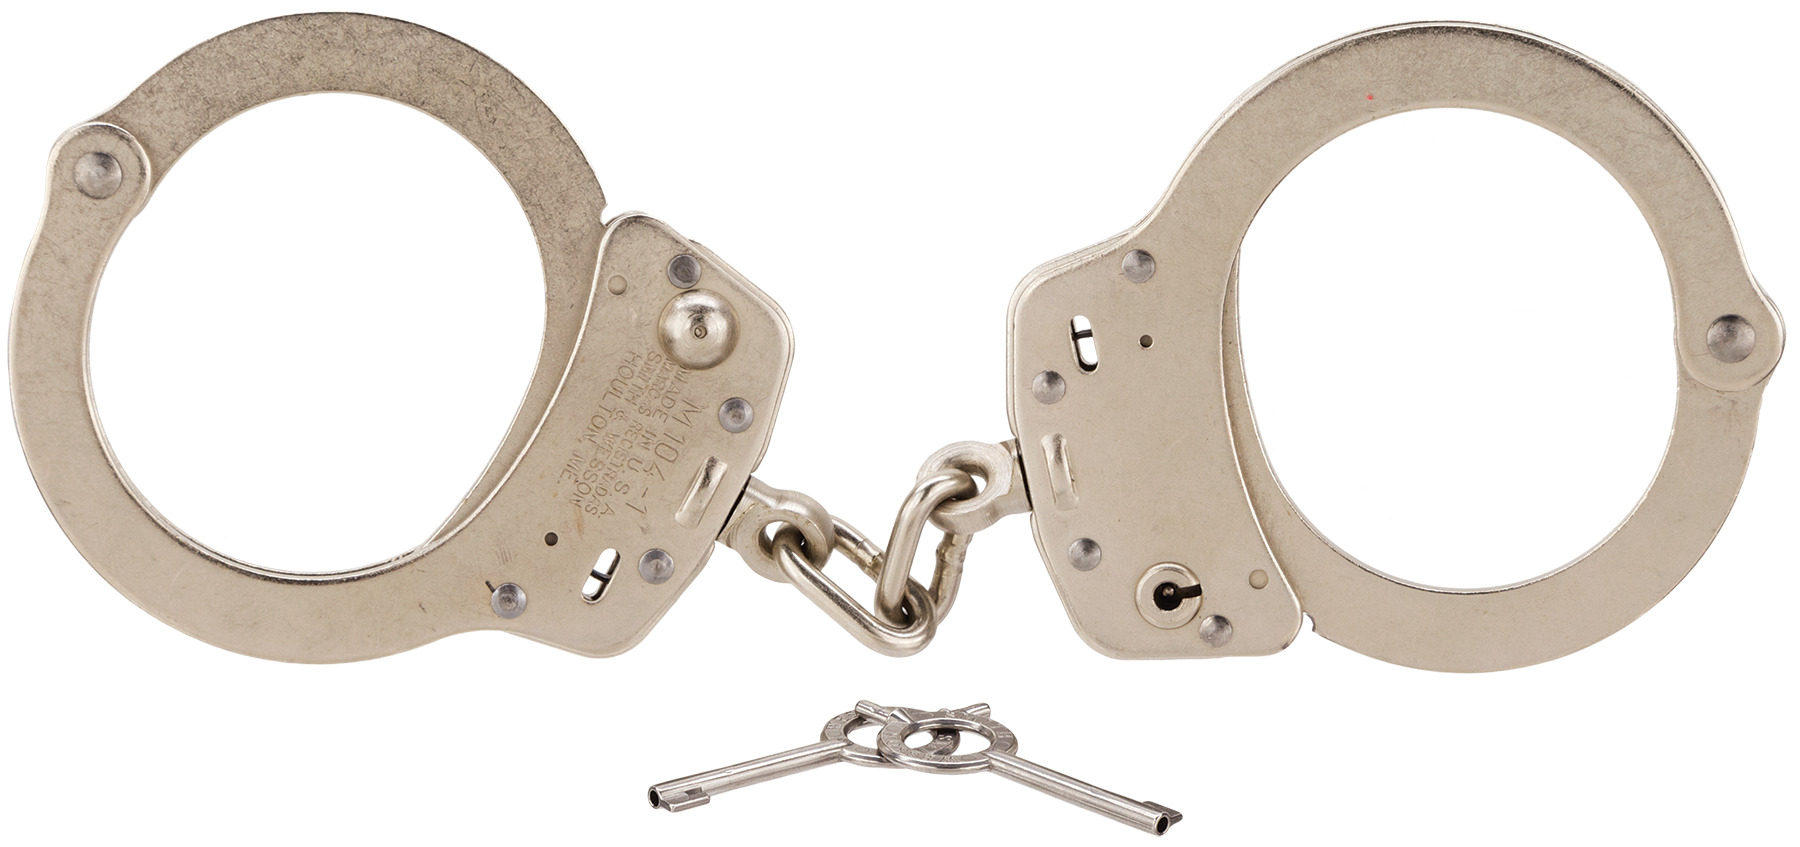 handcuffs png images download crazypngm crazy png images download #29555